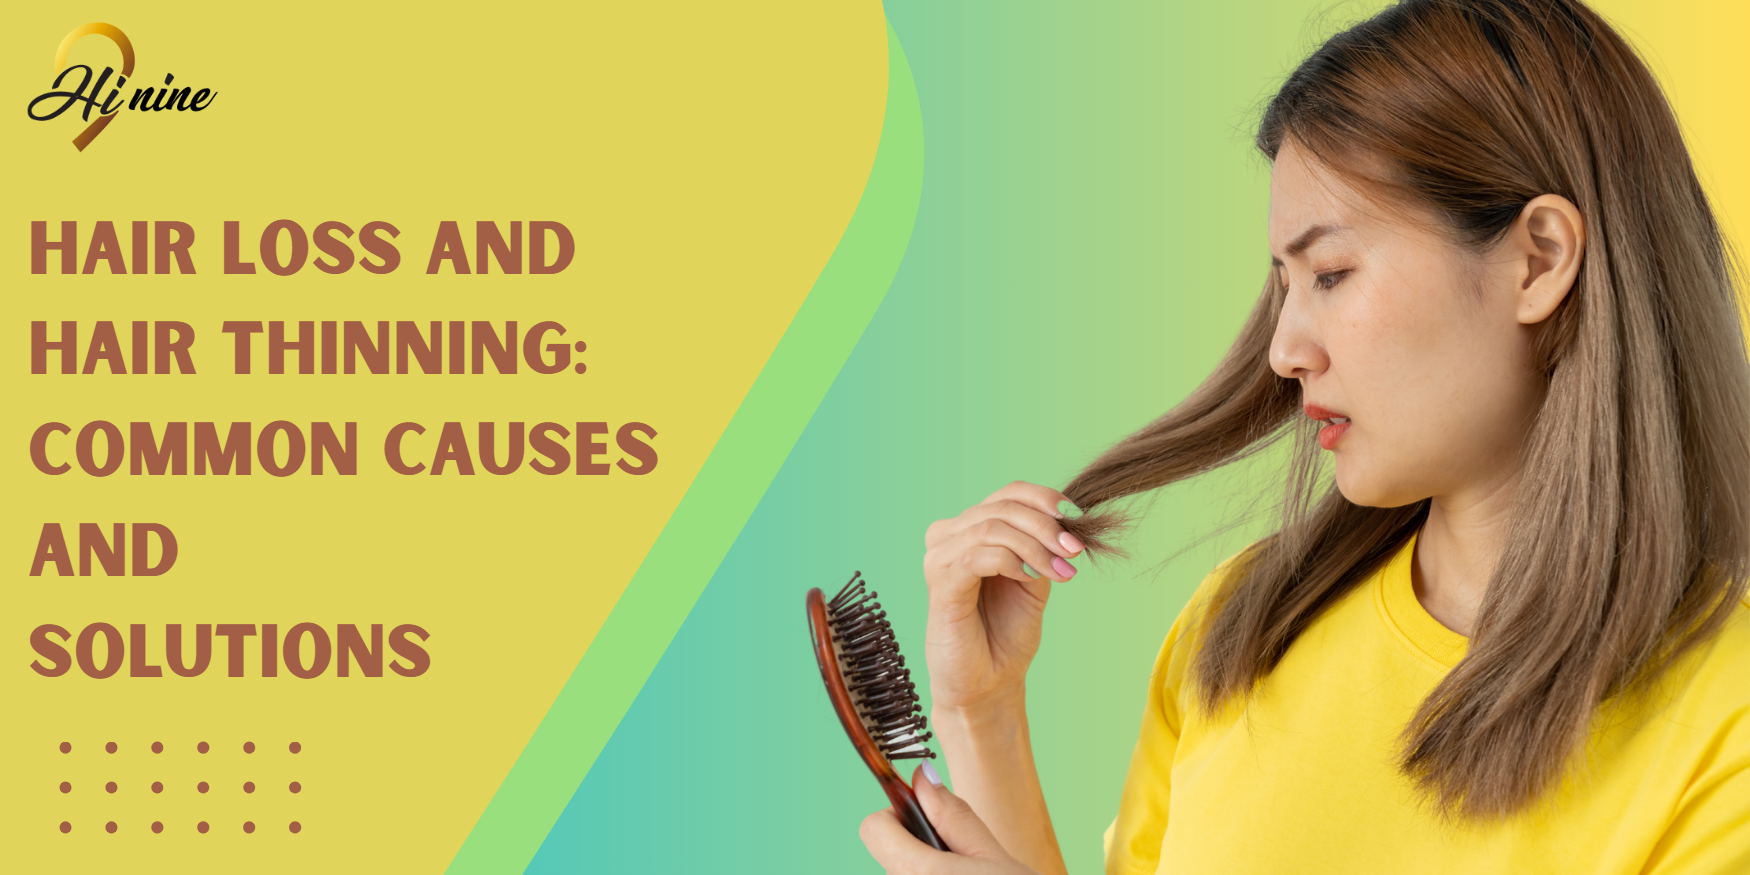 Understanding Hair Loss and Hair Thinning: Common Causes and Potential Solutions